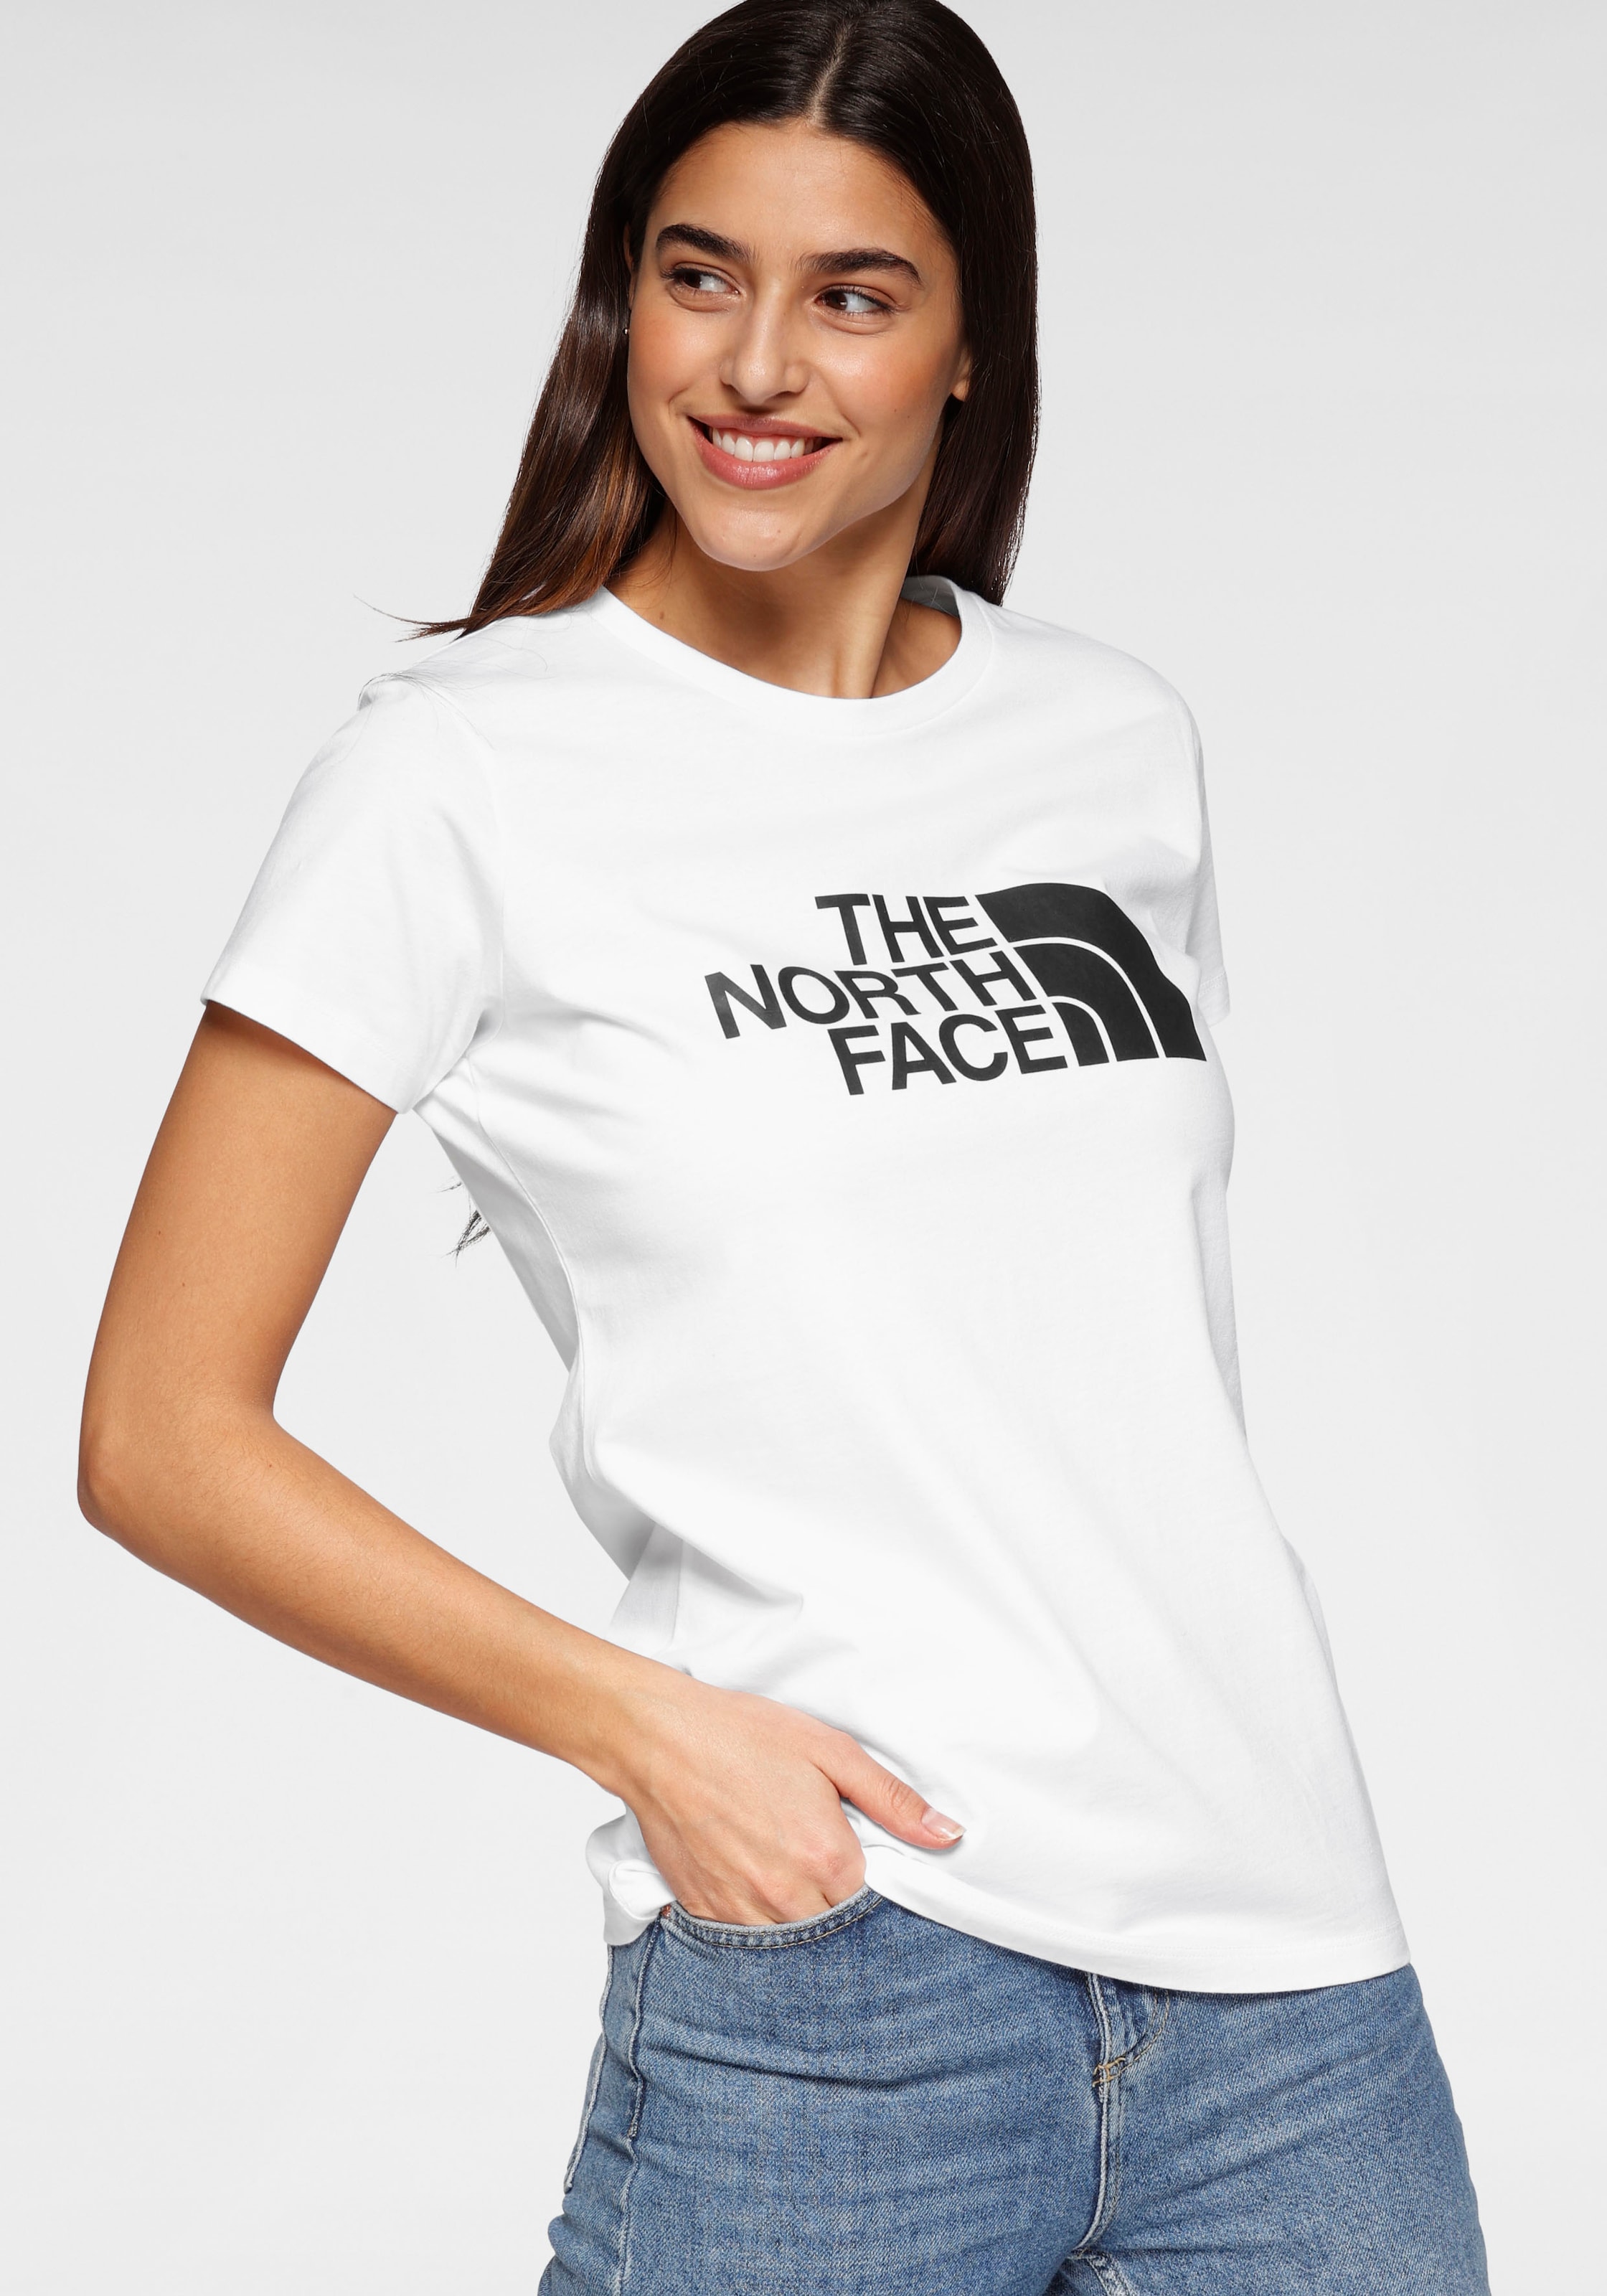 North im Shop OTTO Face The T-Shirt Online